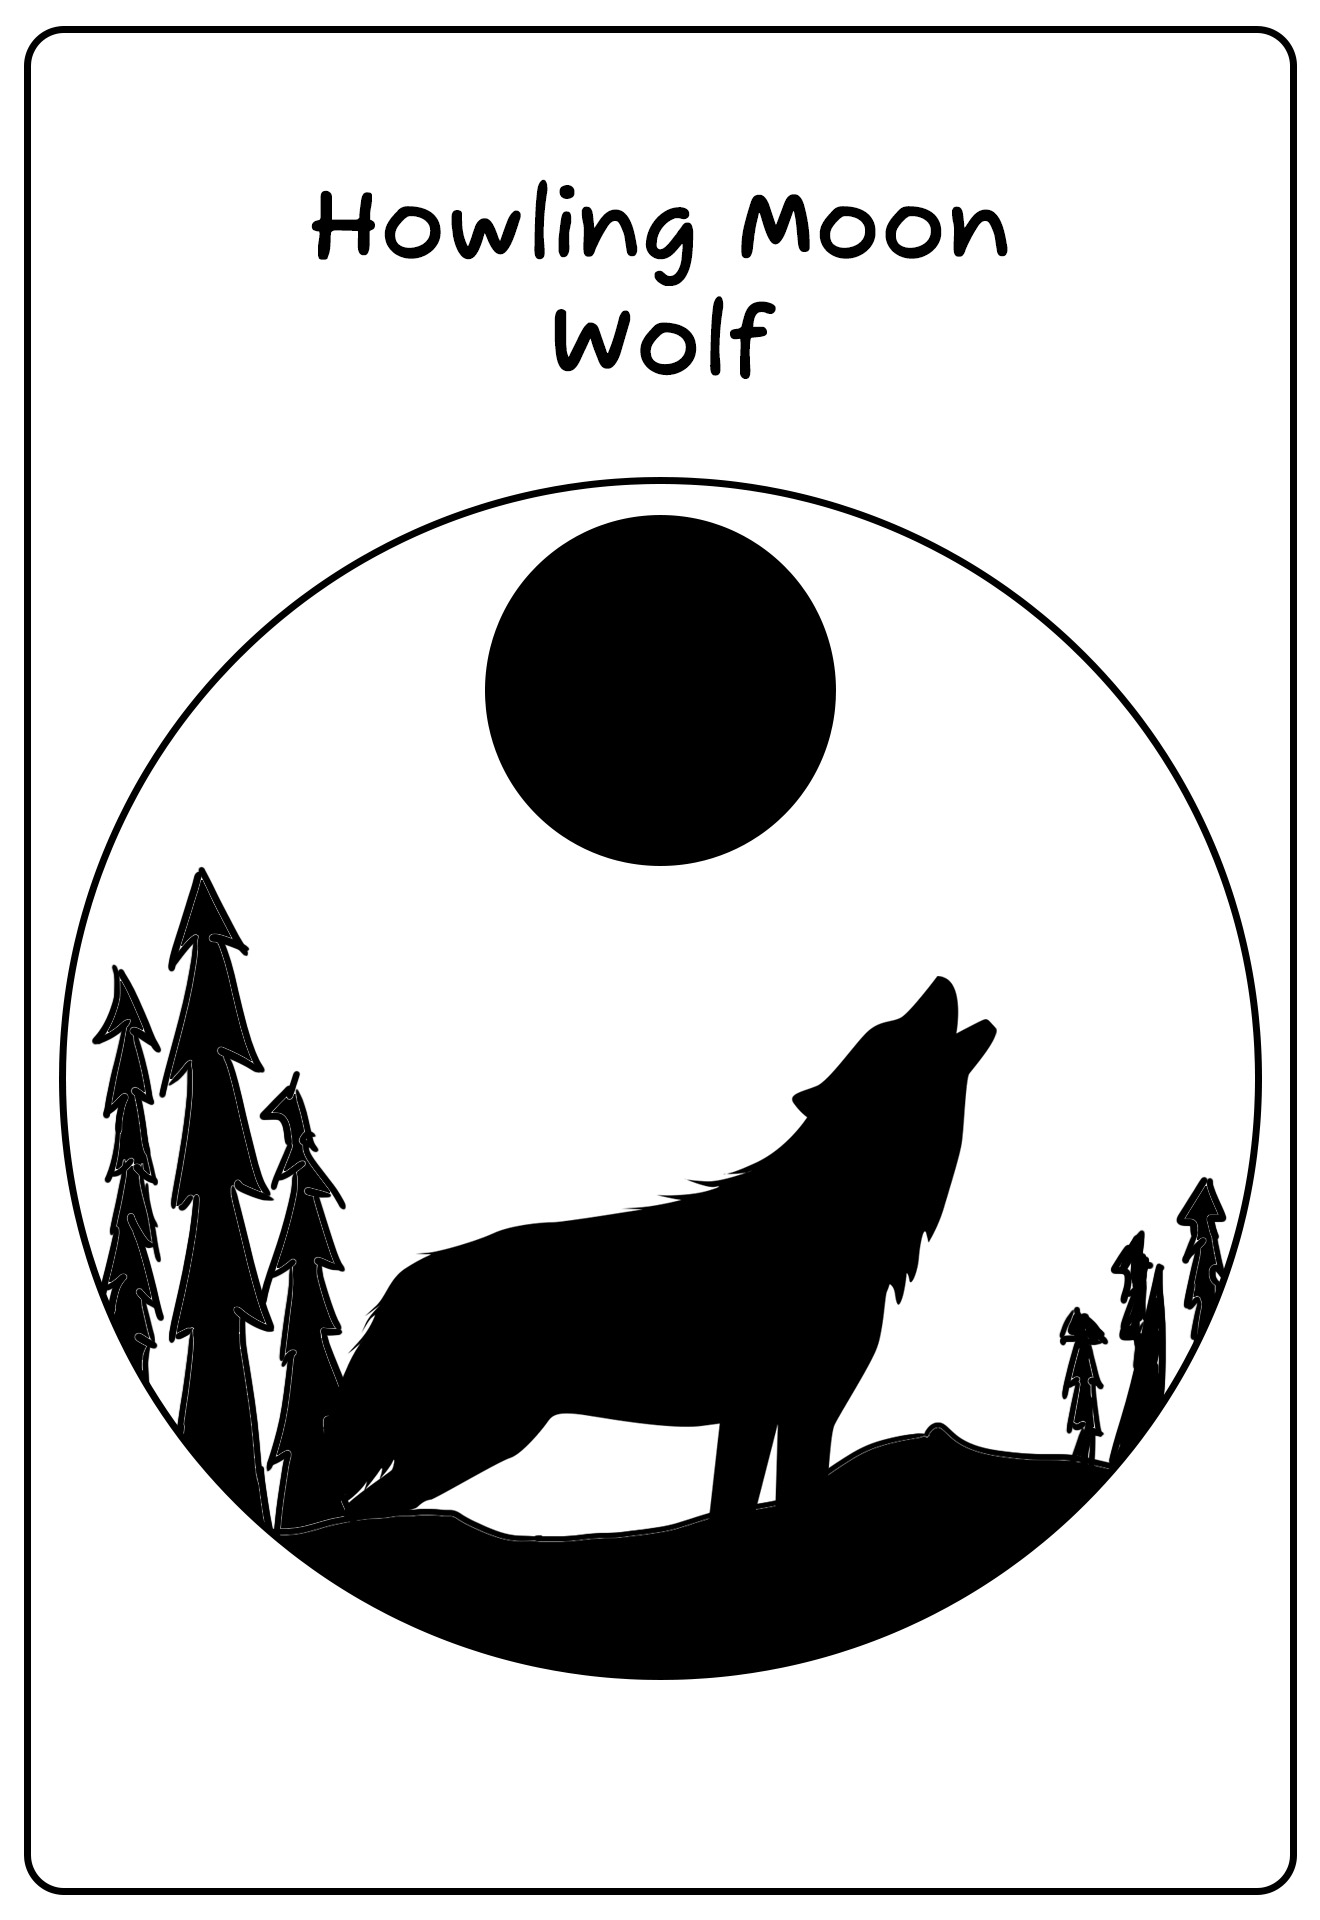 Printable Pumpkin Stencil For Carving Howling Wolves At Moon